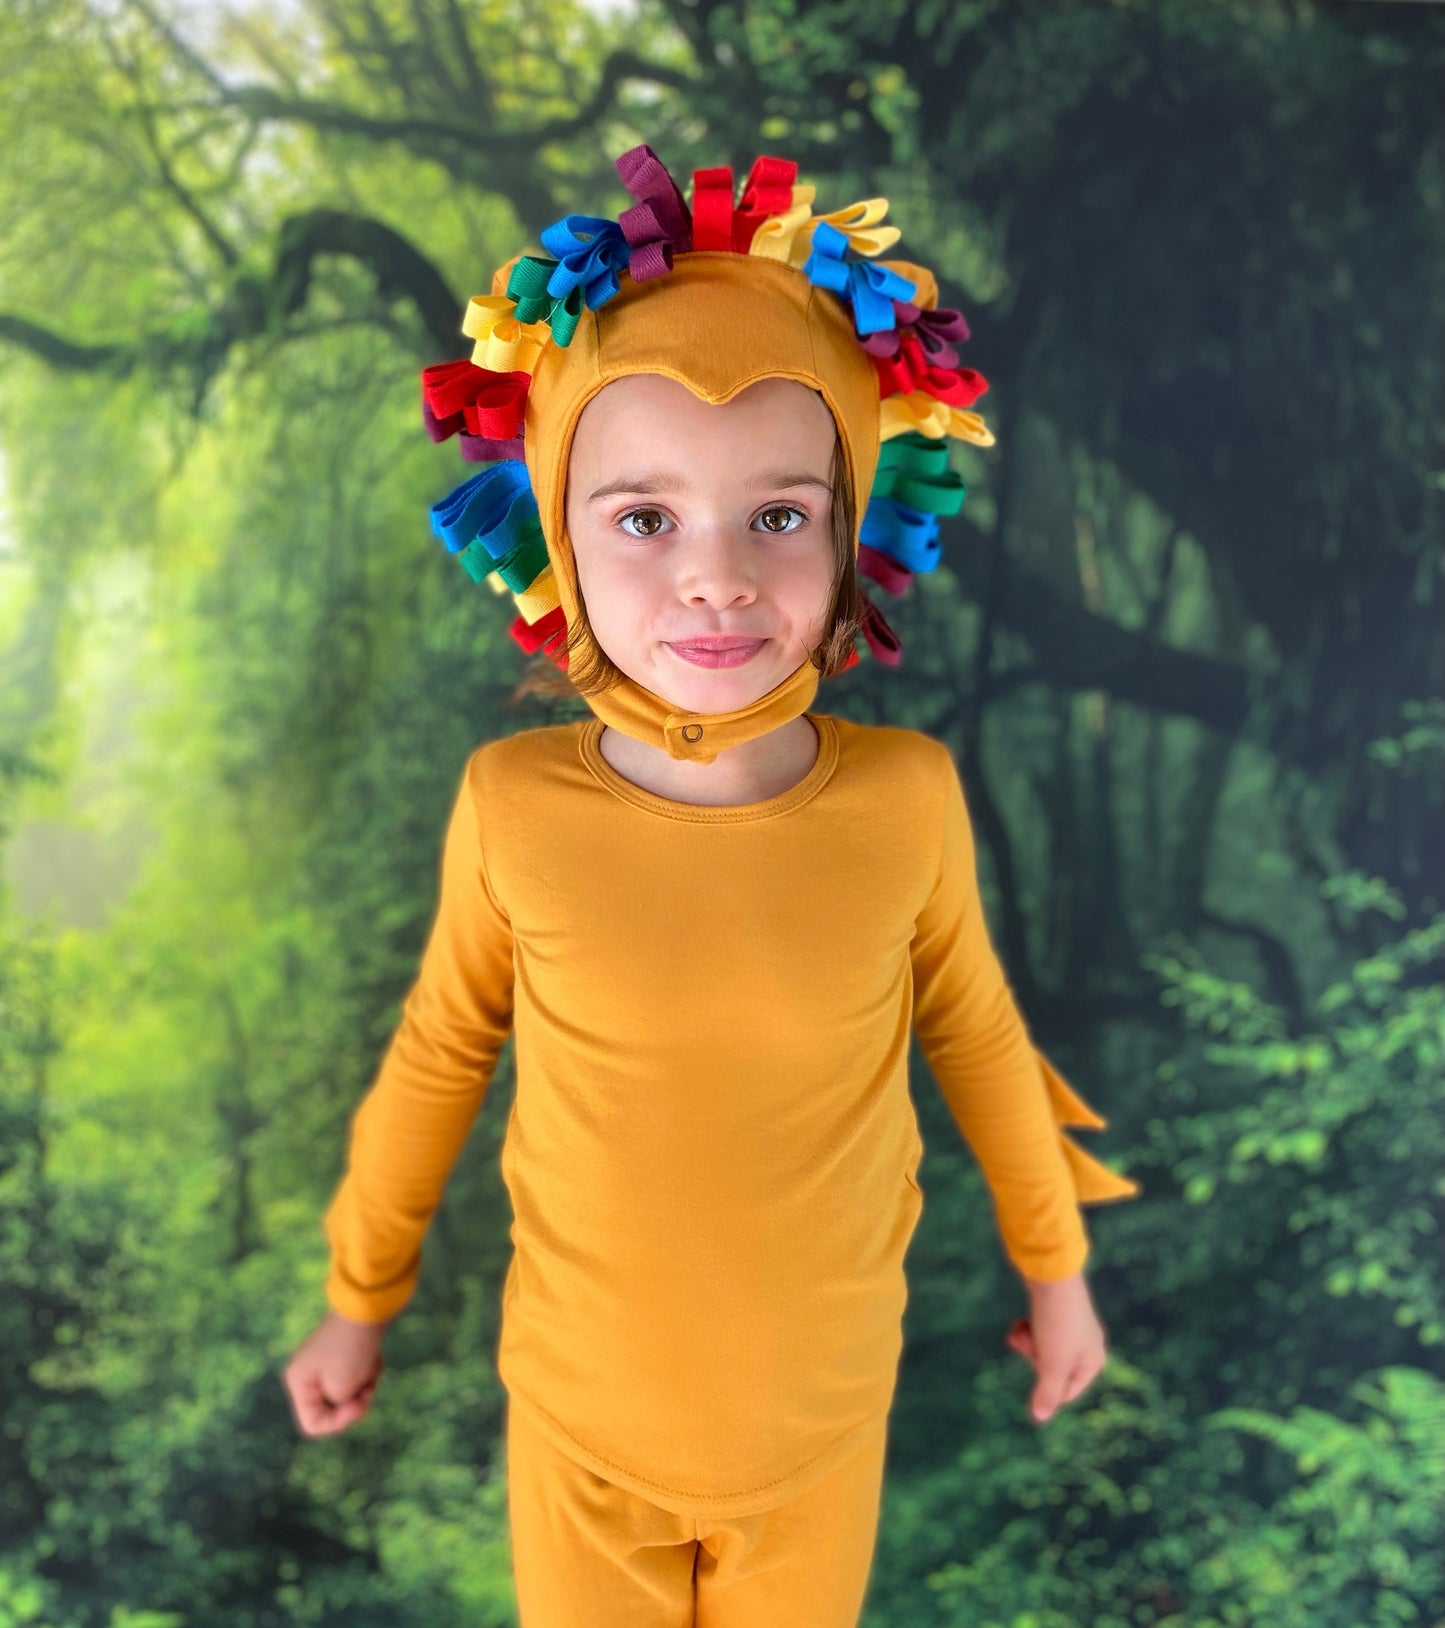 Lion costume for kids, halloween costume for kids, toddler lion costume, rainbow lion